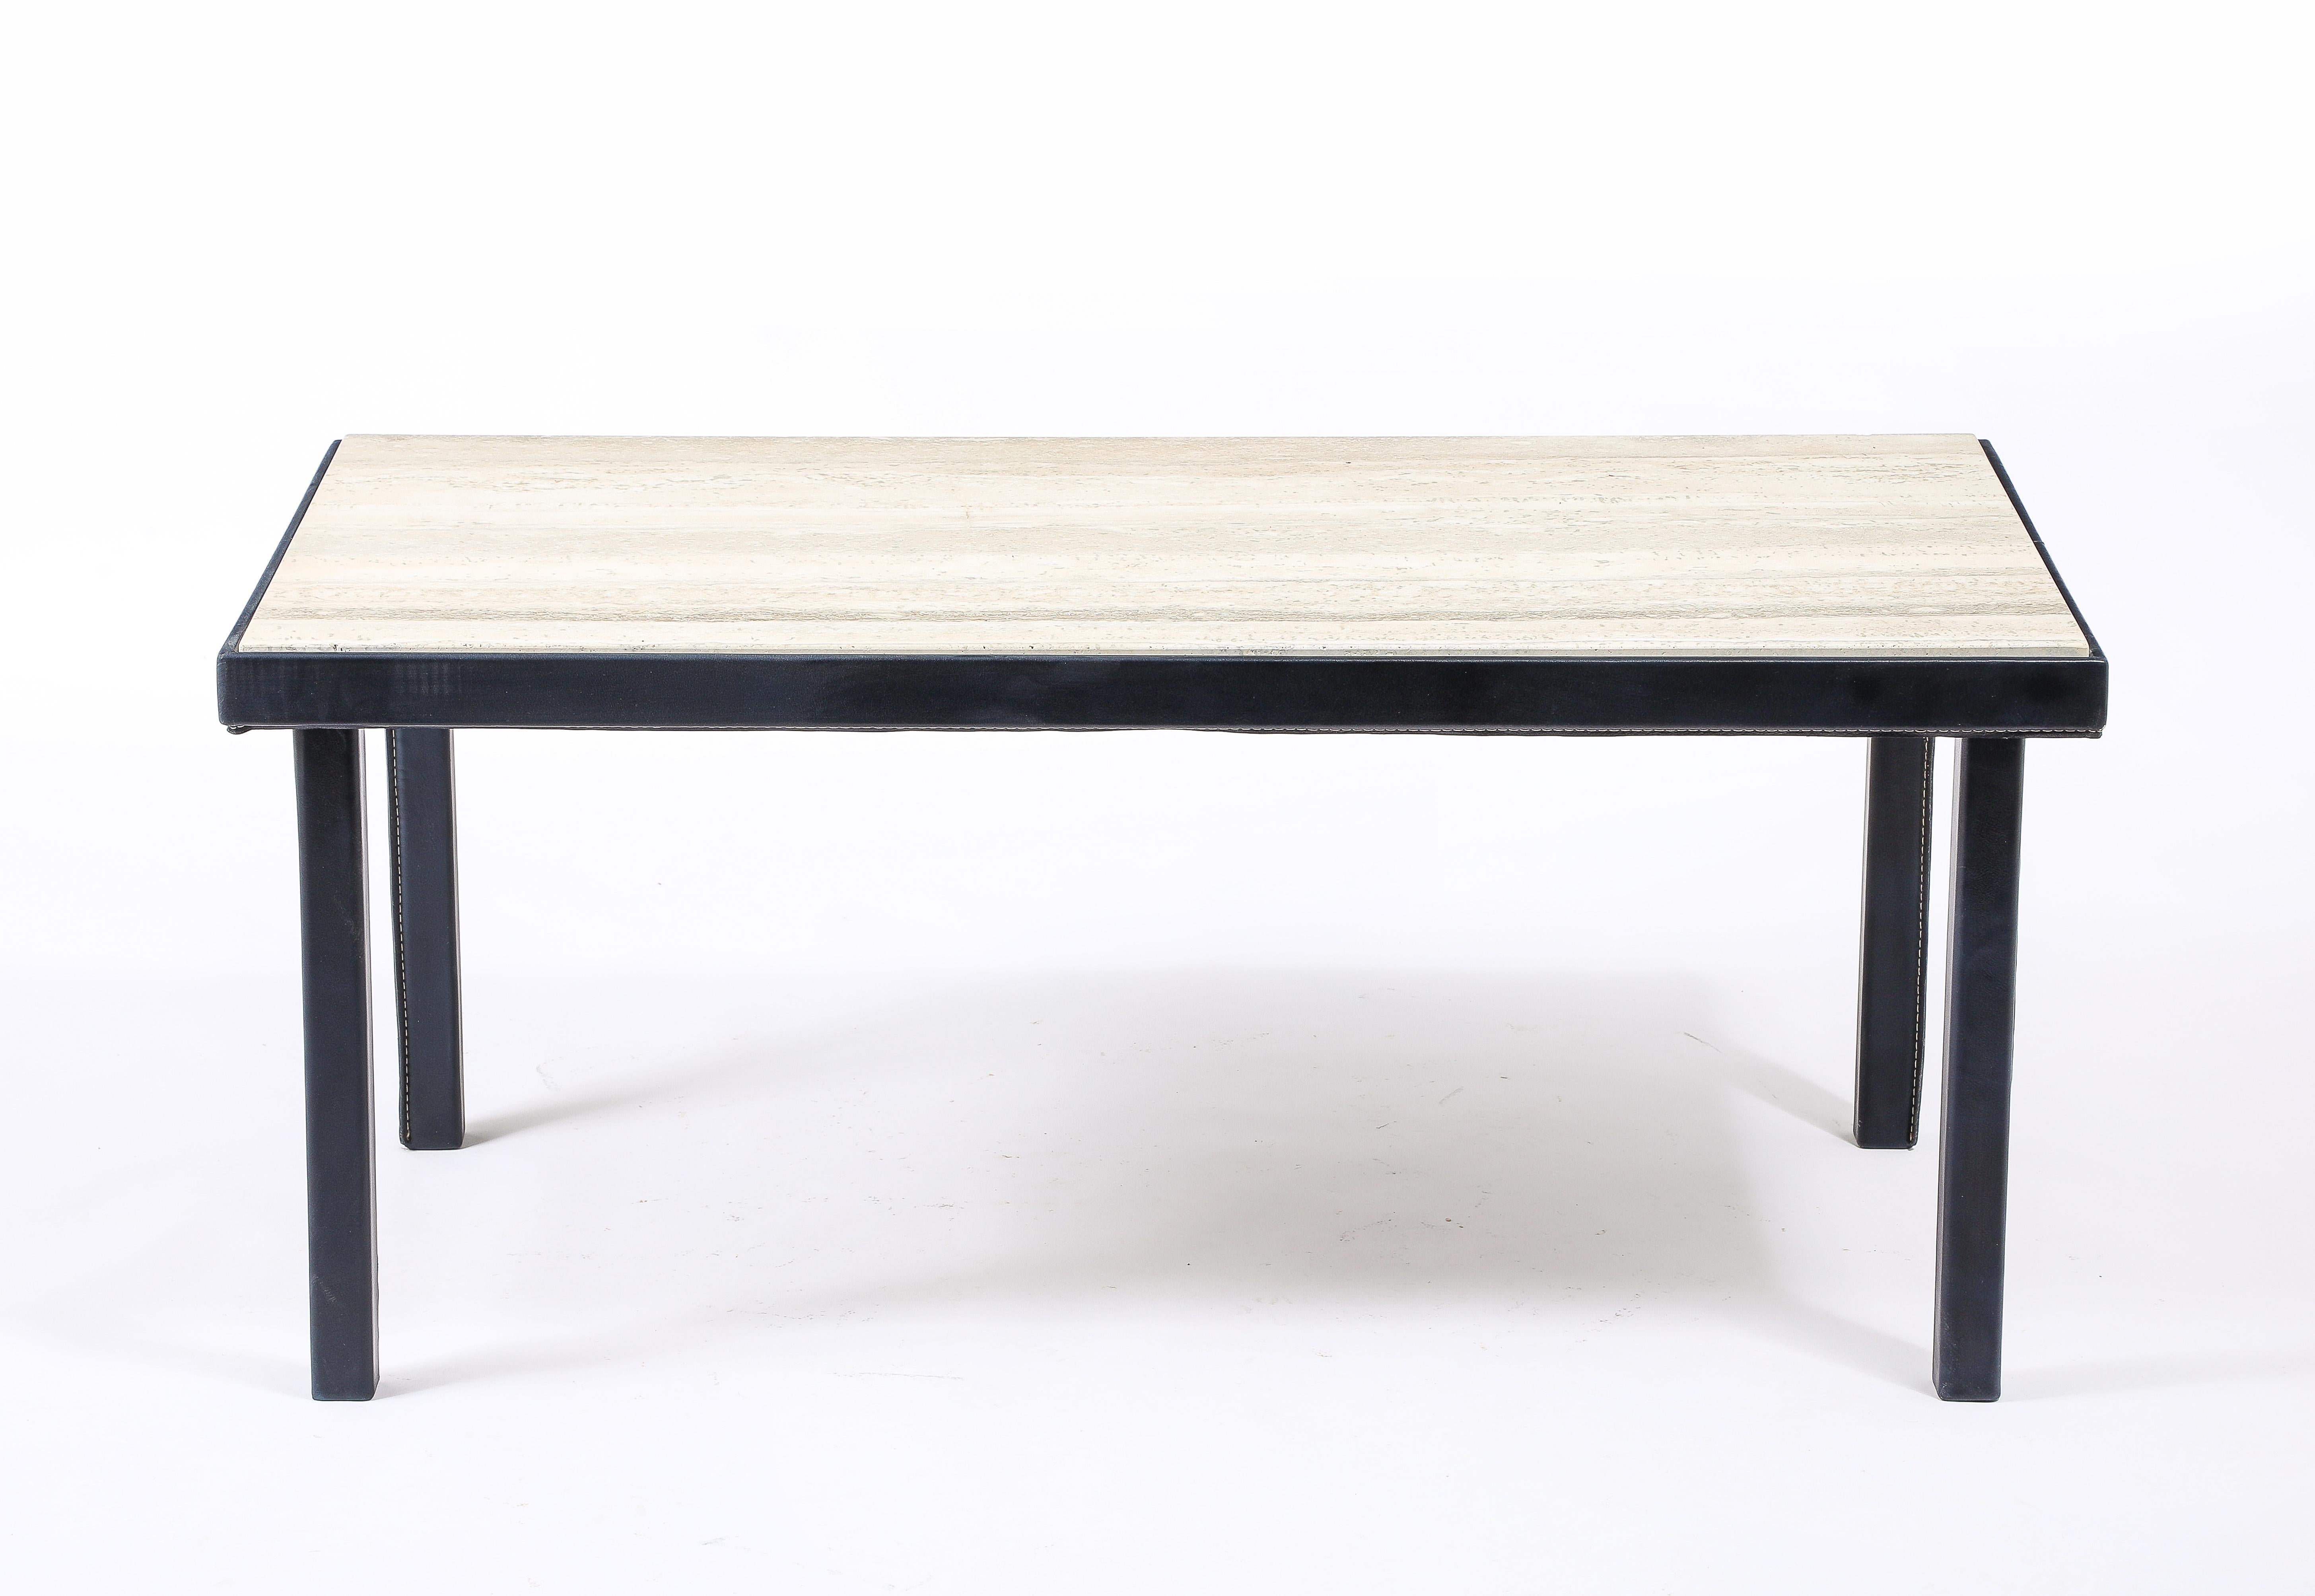 Jacques Adnet Stitched Blue Leather & Travertine Coffee Table, France 1950's For Sale 3